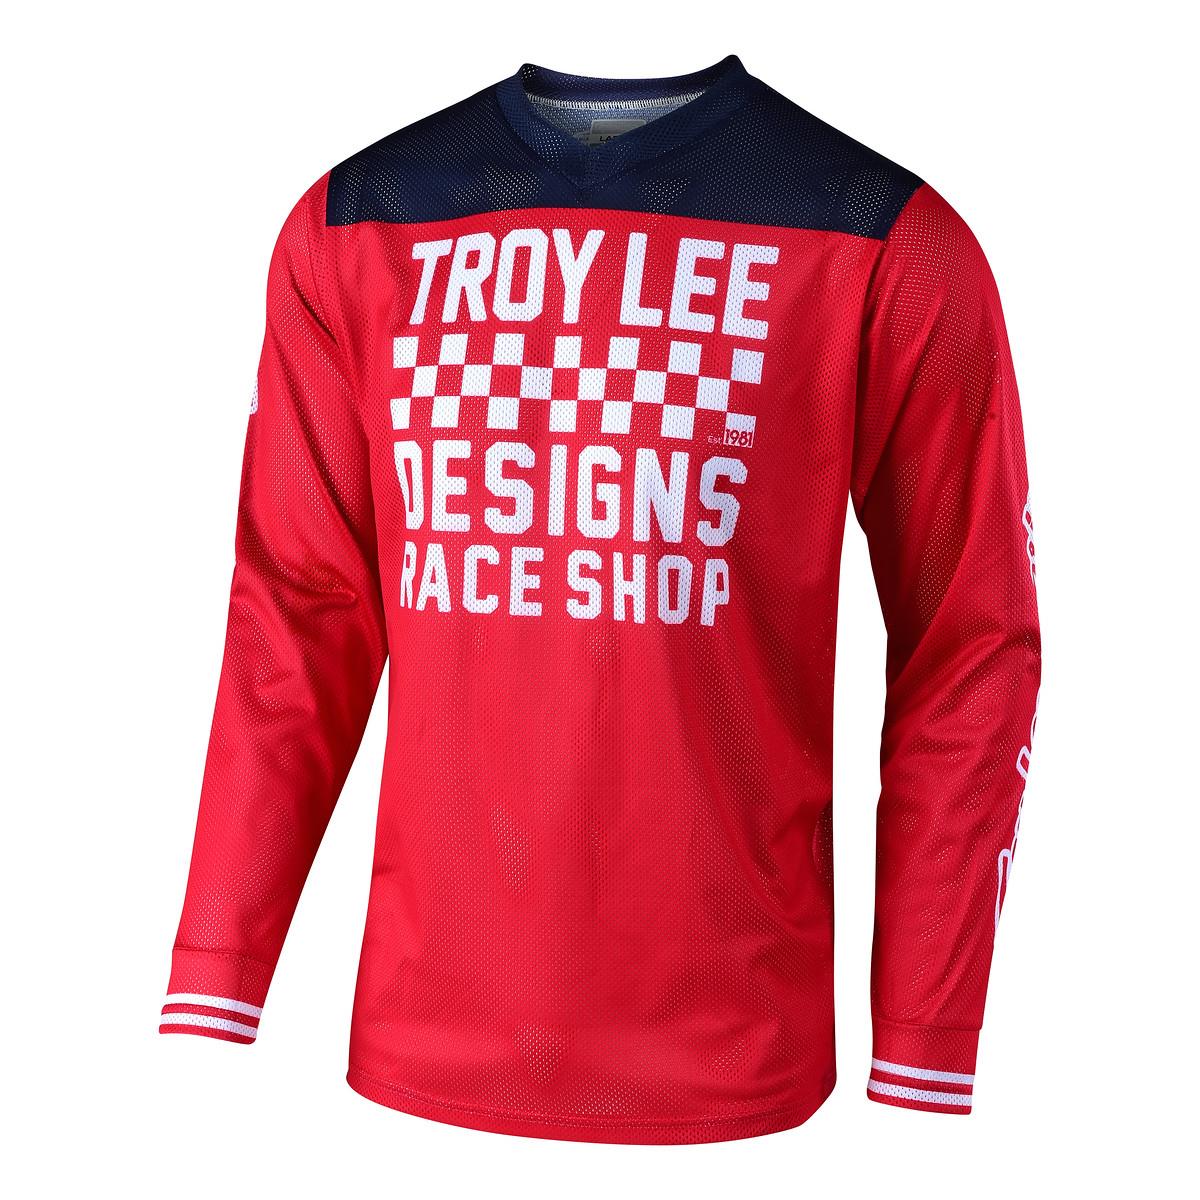 Troy Lee Designs Maillot MX GP Air Raceshop - Red